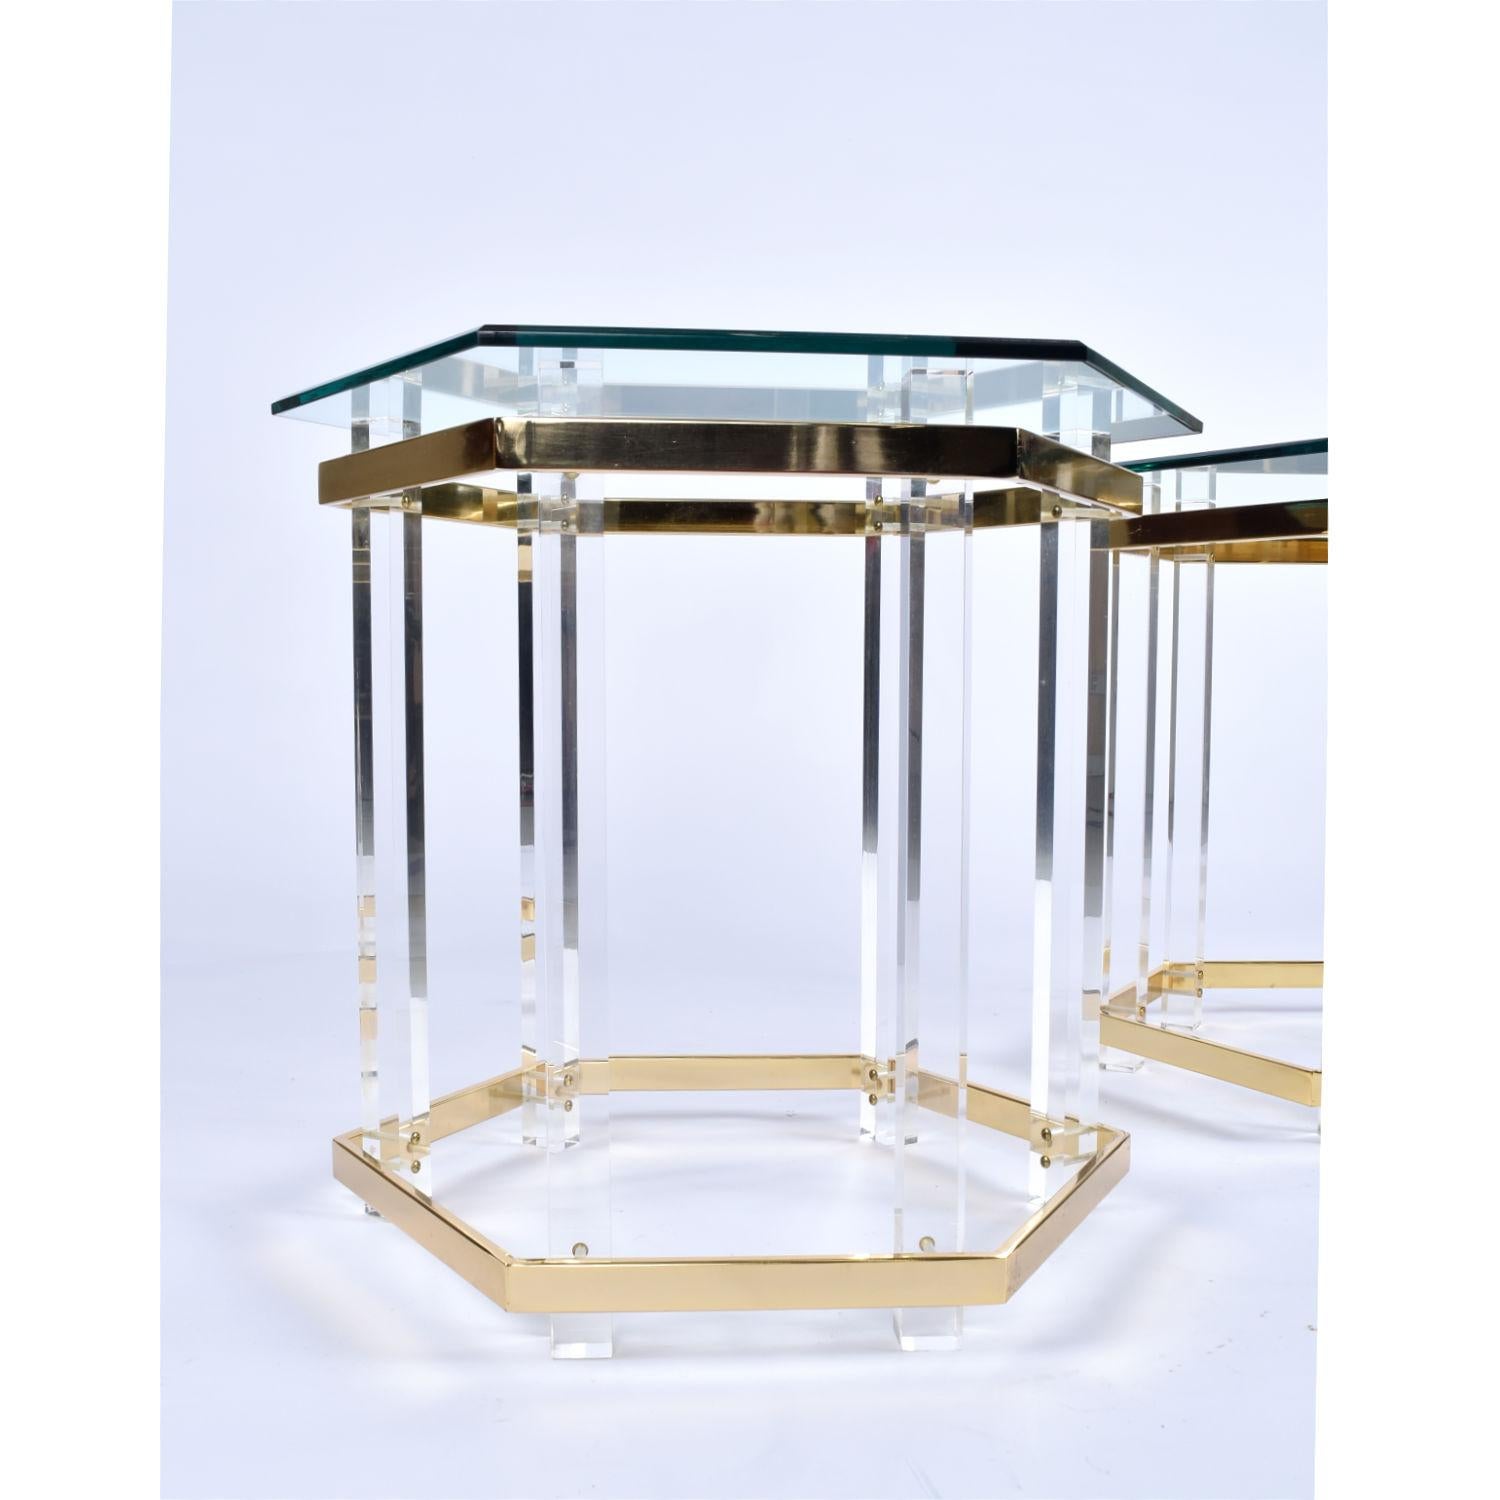 American Vintage 1970s Hollywood Regency Acrylic Lucite Glass and Brass End Tables